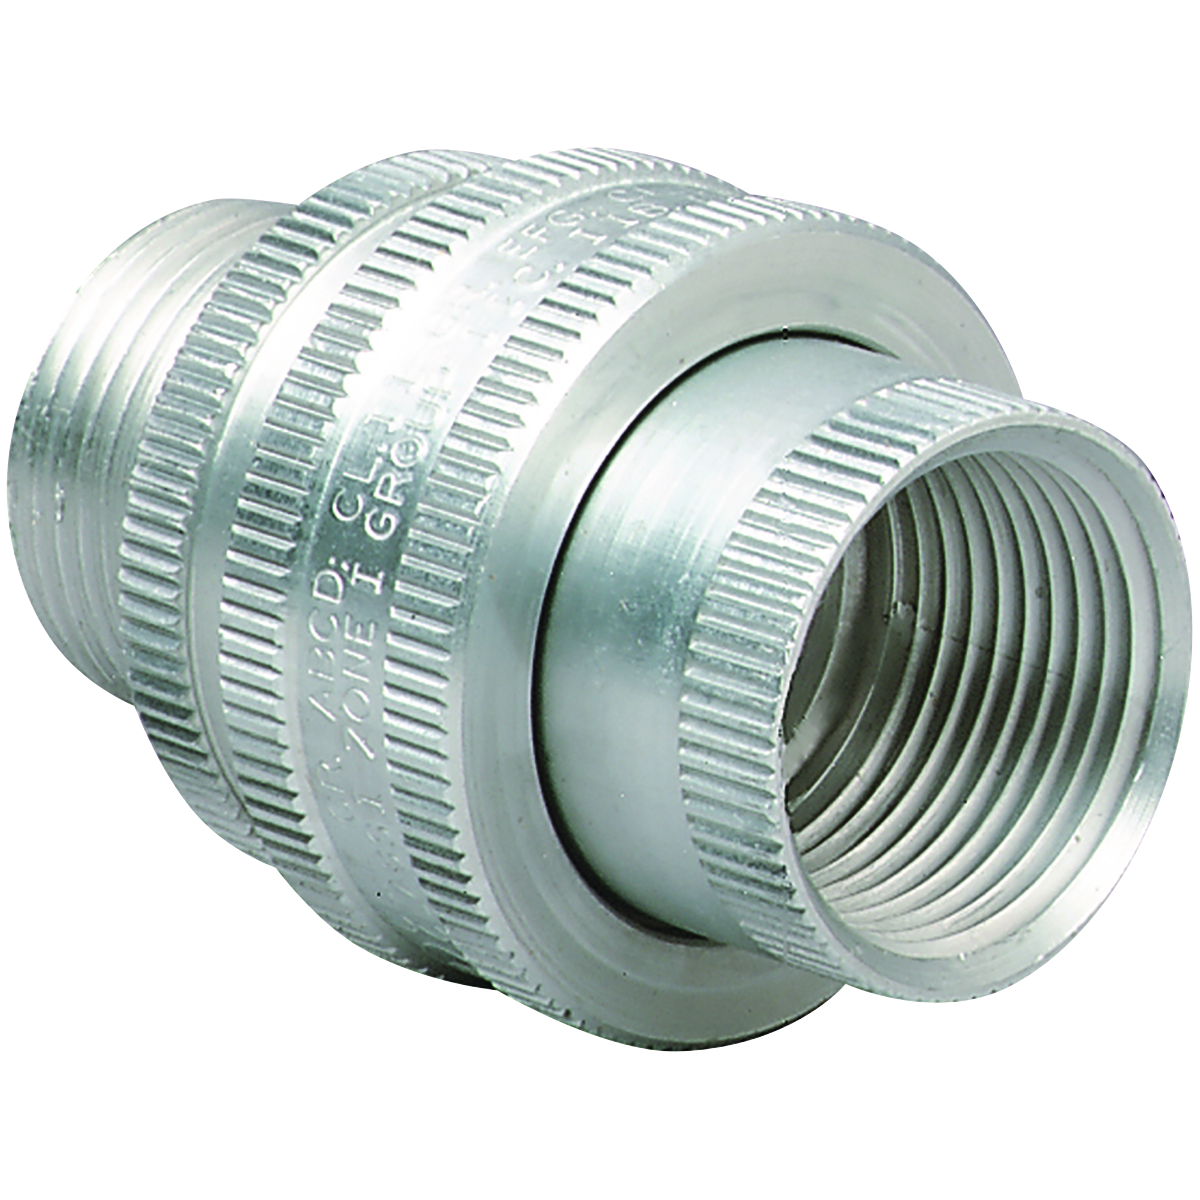 GUM SERIES - ALUMINUM ATEX AND IECEX CERTIFIED UNION - MALE/FEMALE - HUBSIZE 3-1/2 INCH